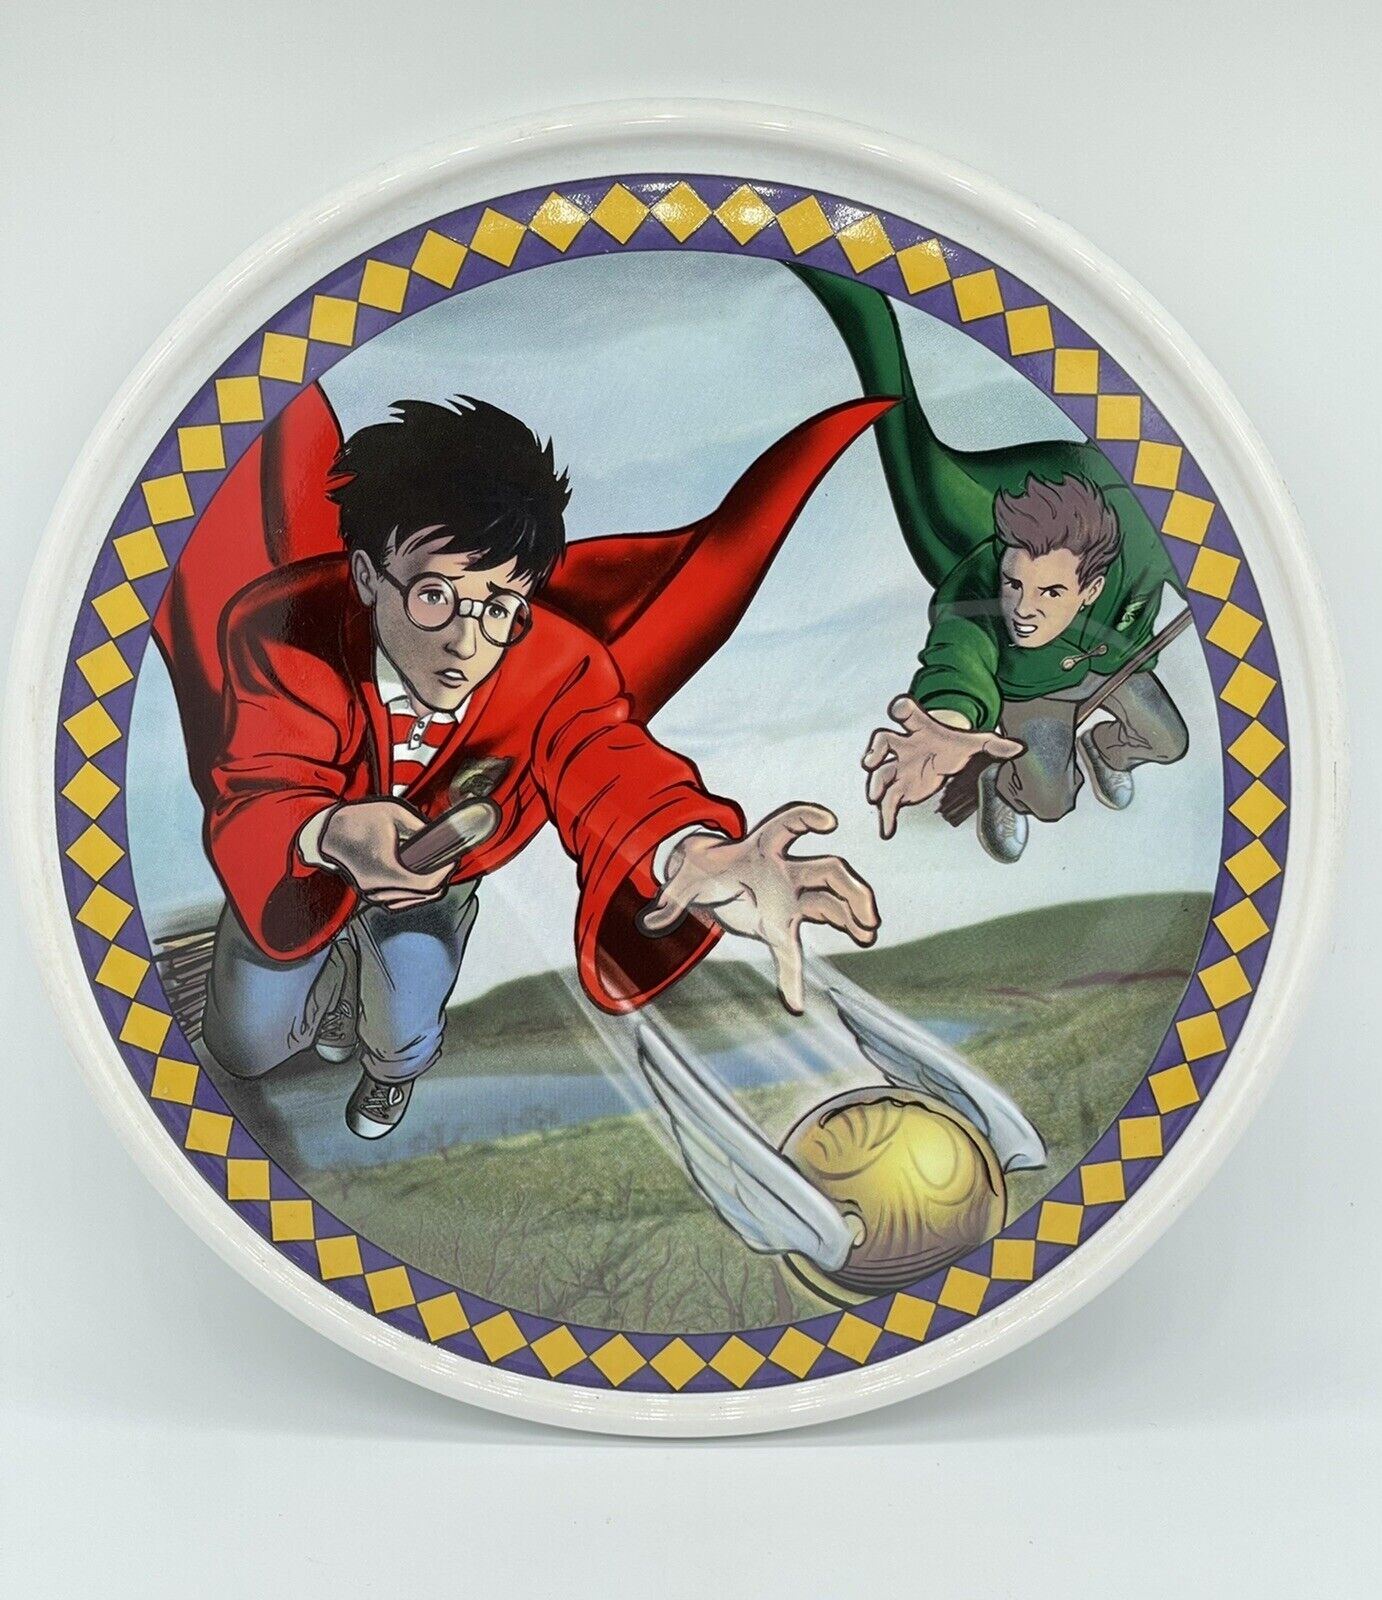 Harry Potter The Sorcerer’s Stone Quidditch Ceramic Plate 2001 Enesco 8.25”